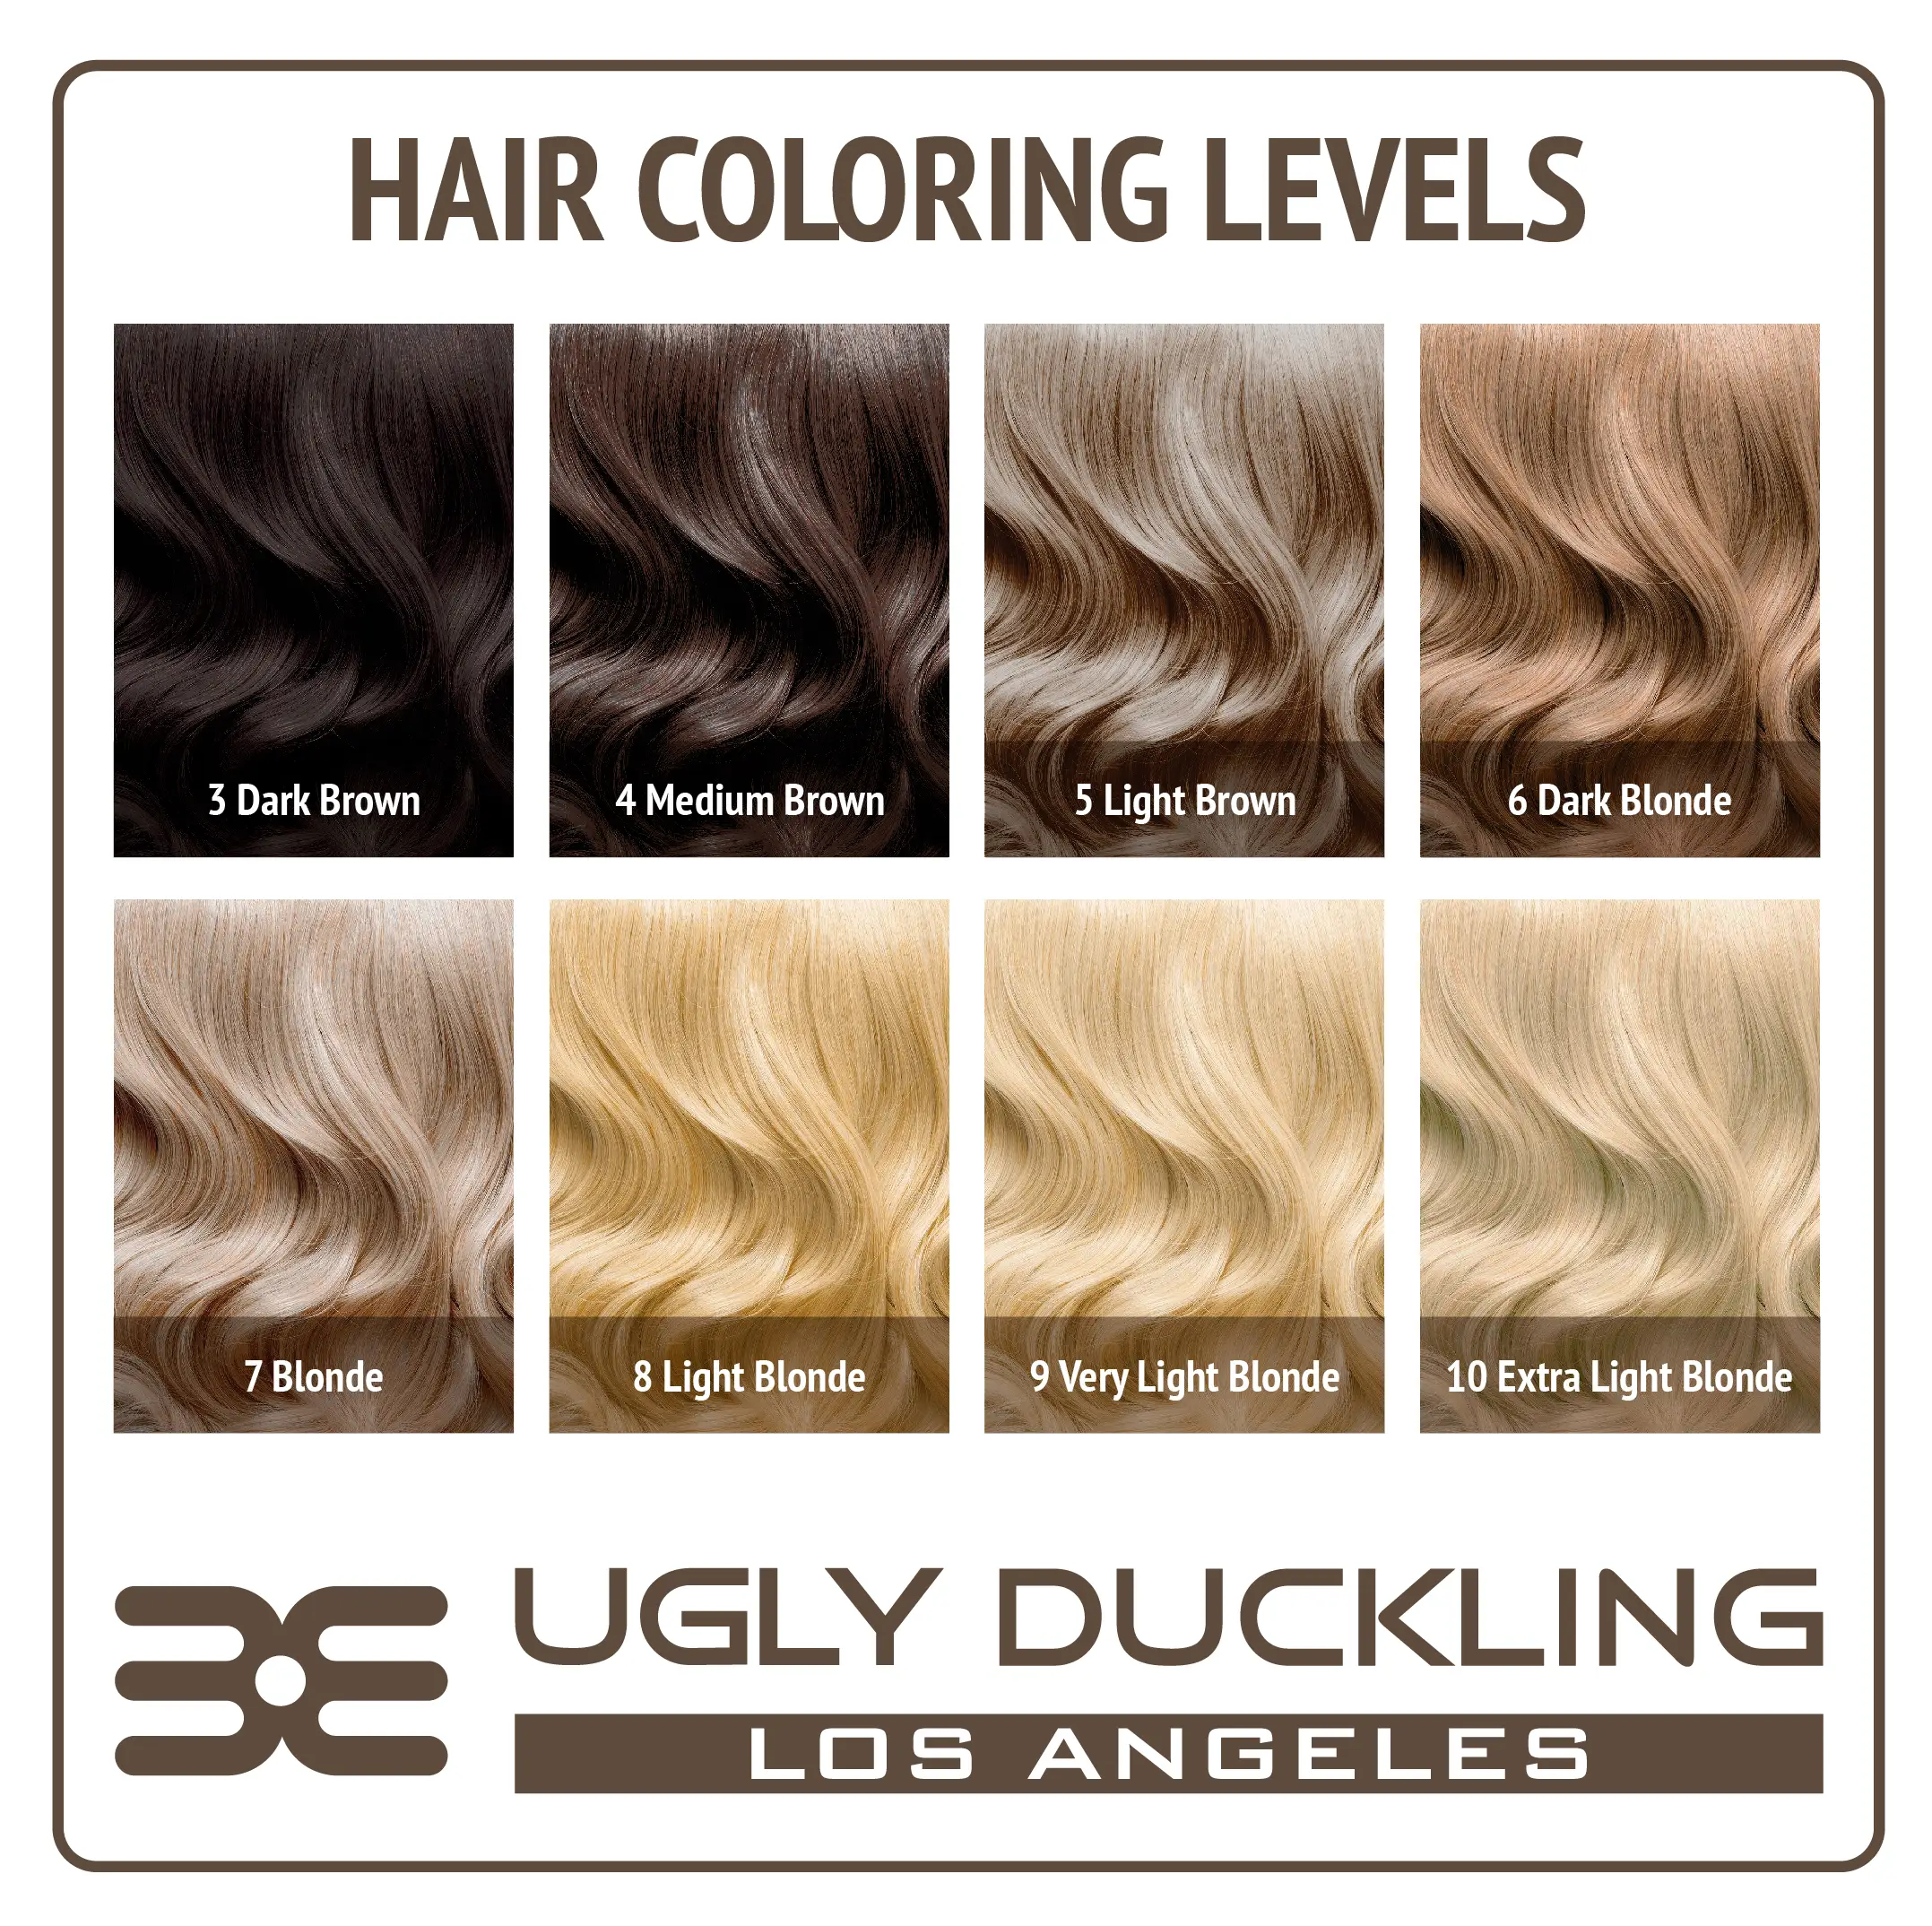 How to Color Hair Professionally Step by Step - Ugly Duckling